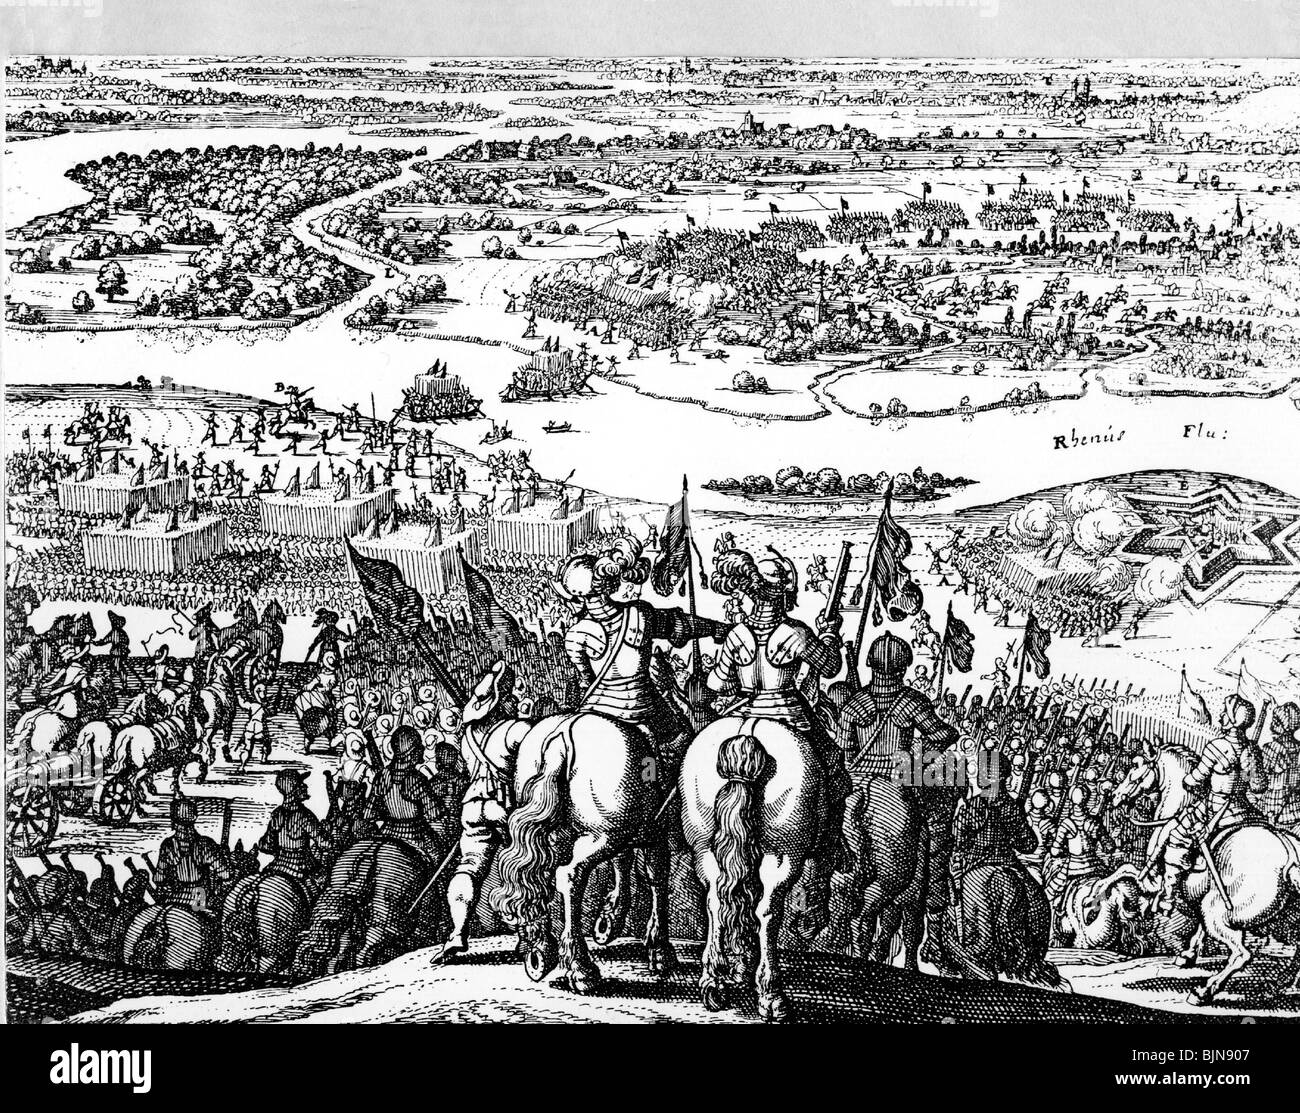 events, Thirty Years War 1618 - 1648, Swedish Intervention 1630 - 1635, the Swedish Army crossing the Rhine river near Oppenheim, 21.12.1631, contemporary copper engraving, battle, engagement, formation, soldiers, Erdfelden, Palatinate, Germany, 19th century, historic, historical, people, Stock Photo